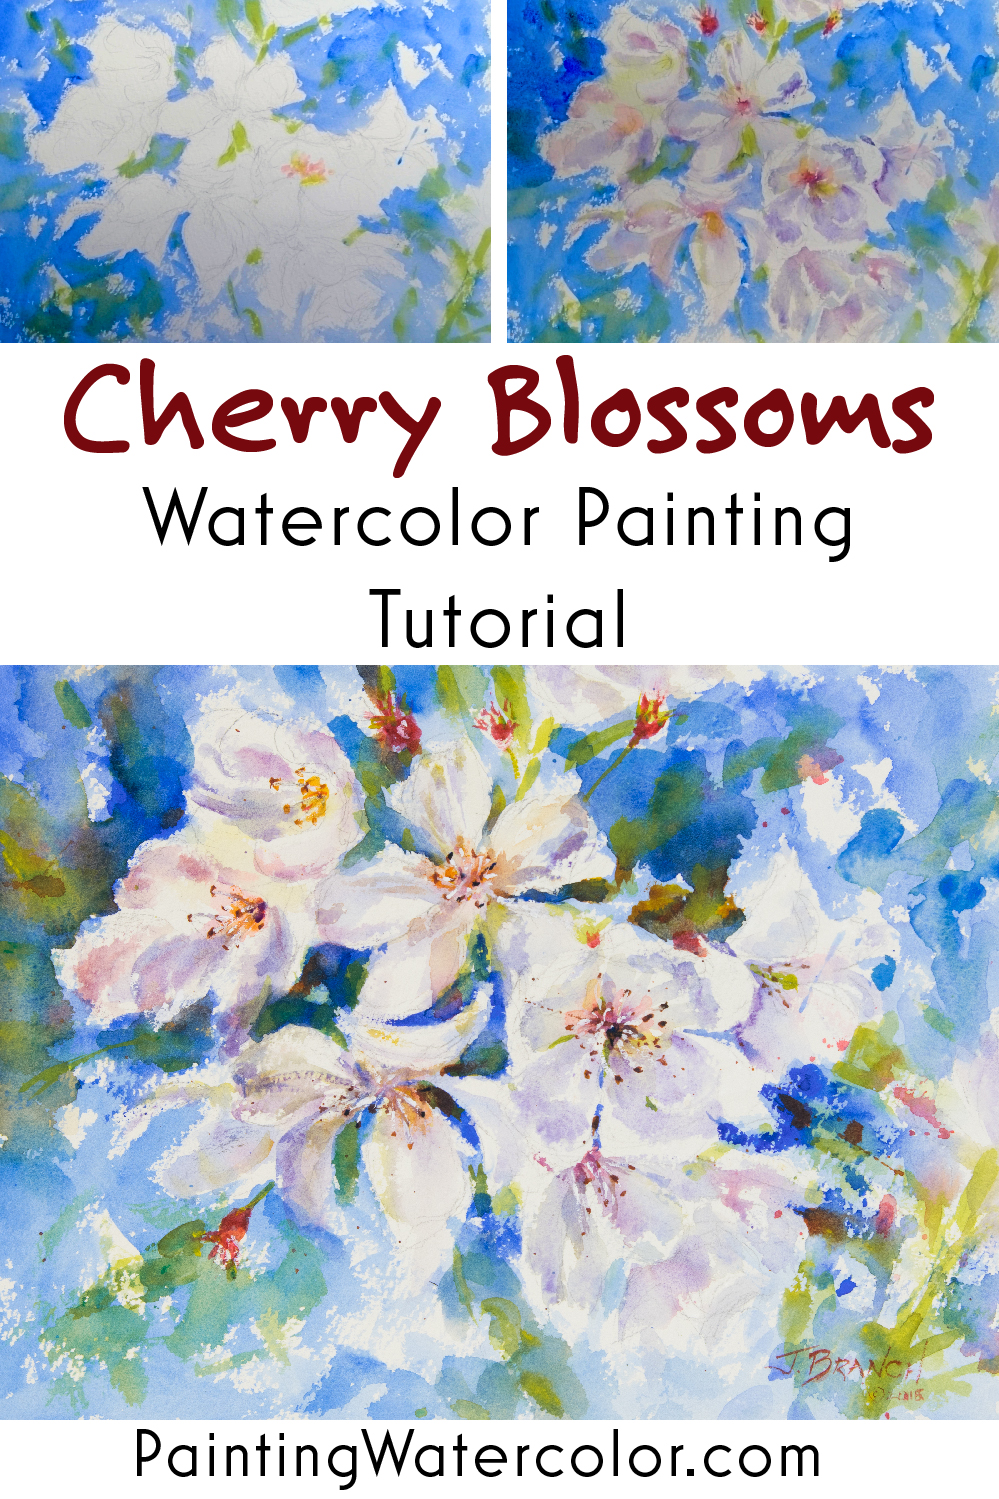 Cherry Blossoms Painting Tutorial watercolor painting tutorial by Jennifer Branch